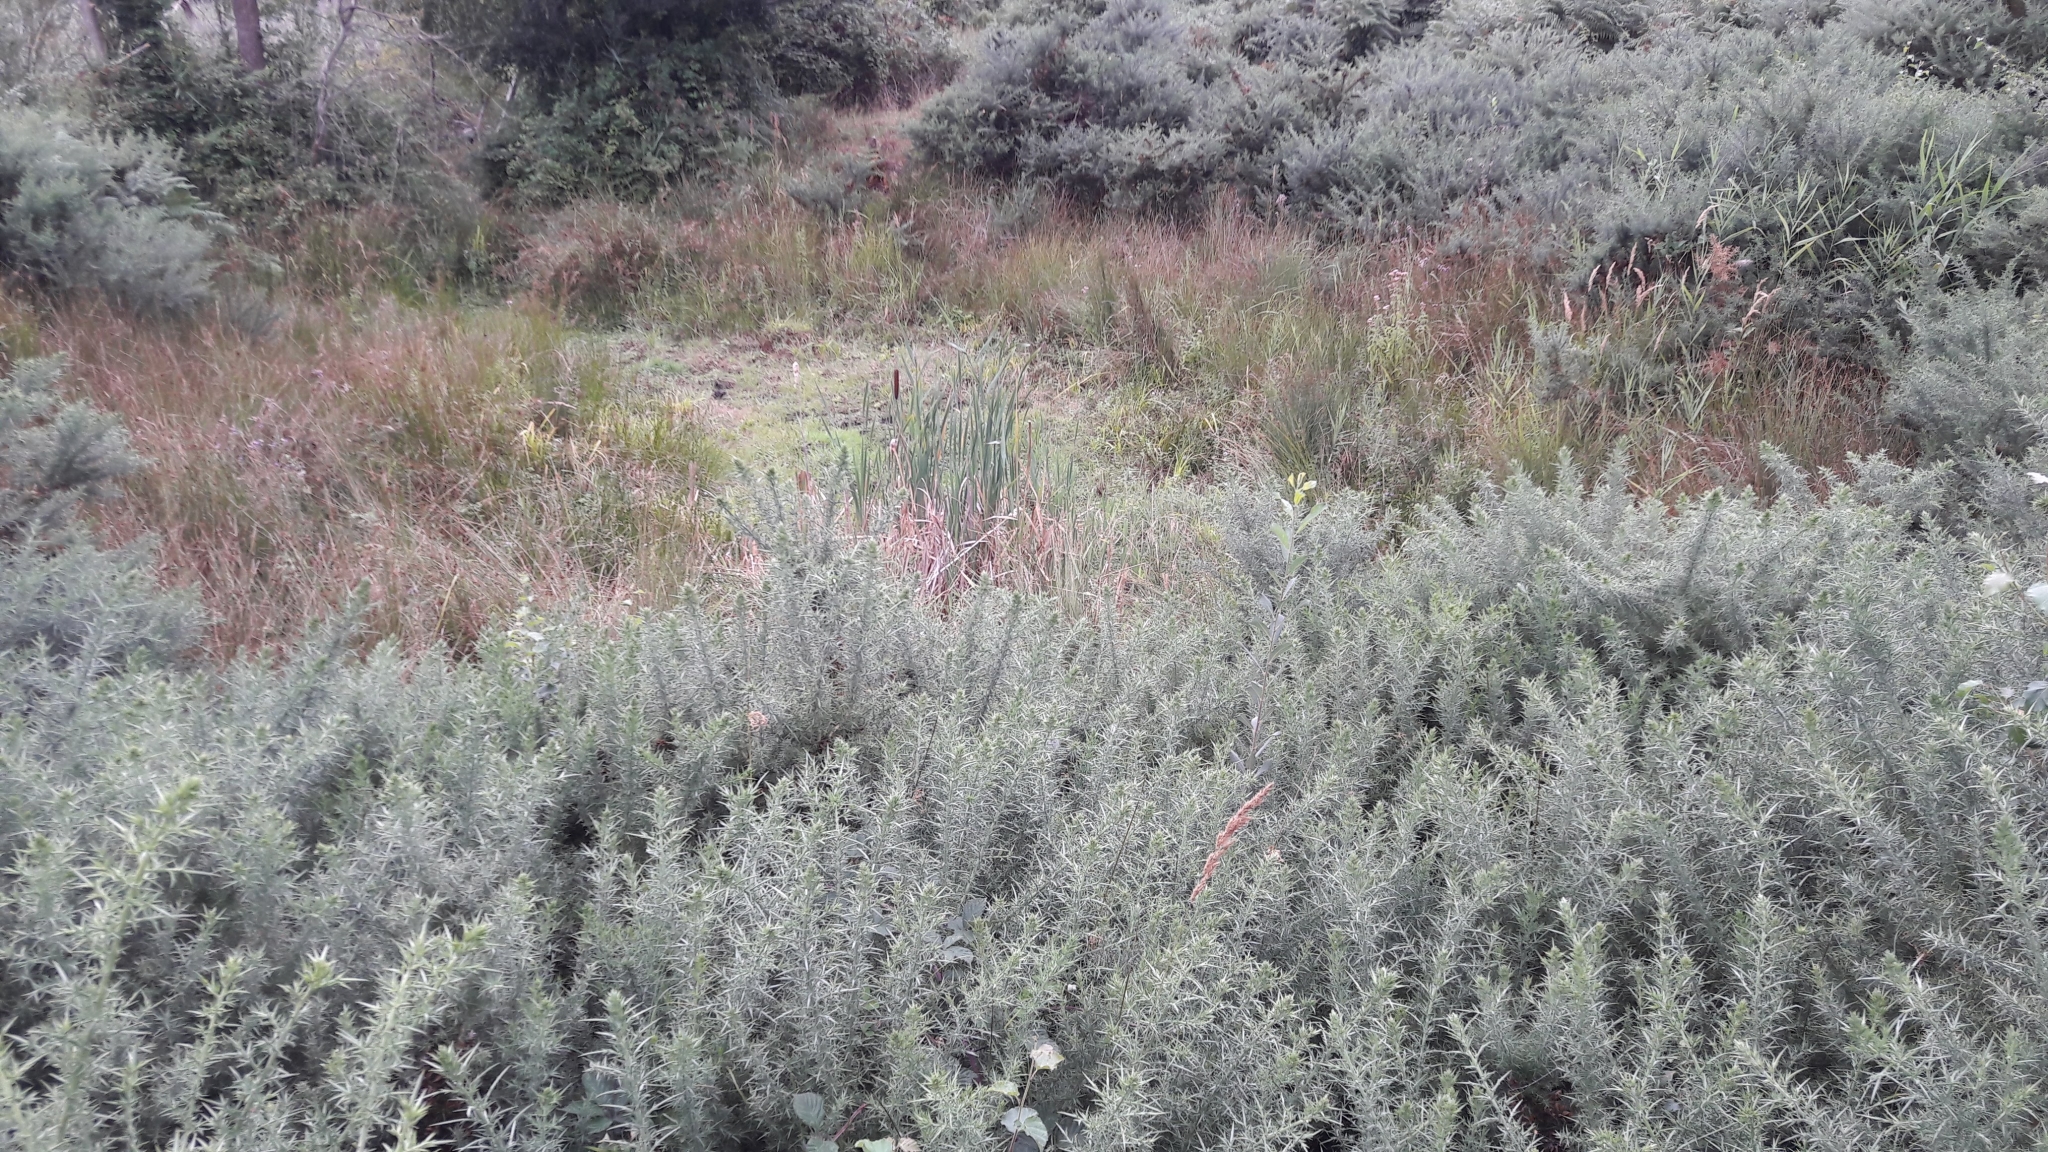 A photo from the FoTF Conservation Event - August 2018 - Gorse Removal at Hockham Hills & Holes : Gorse bushes at the work site